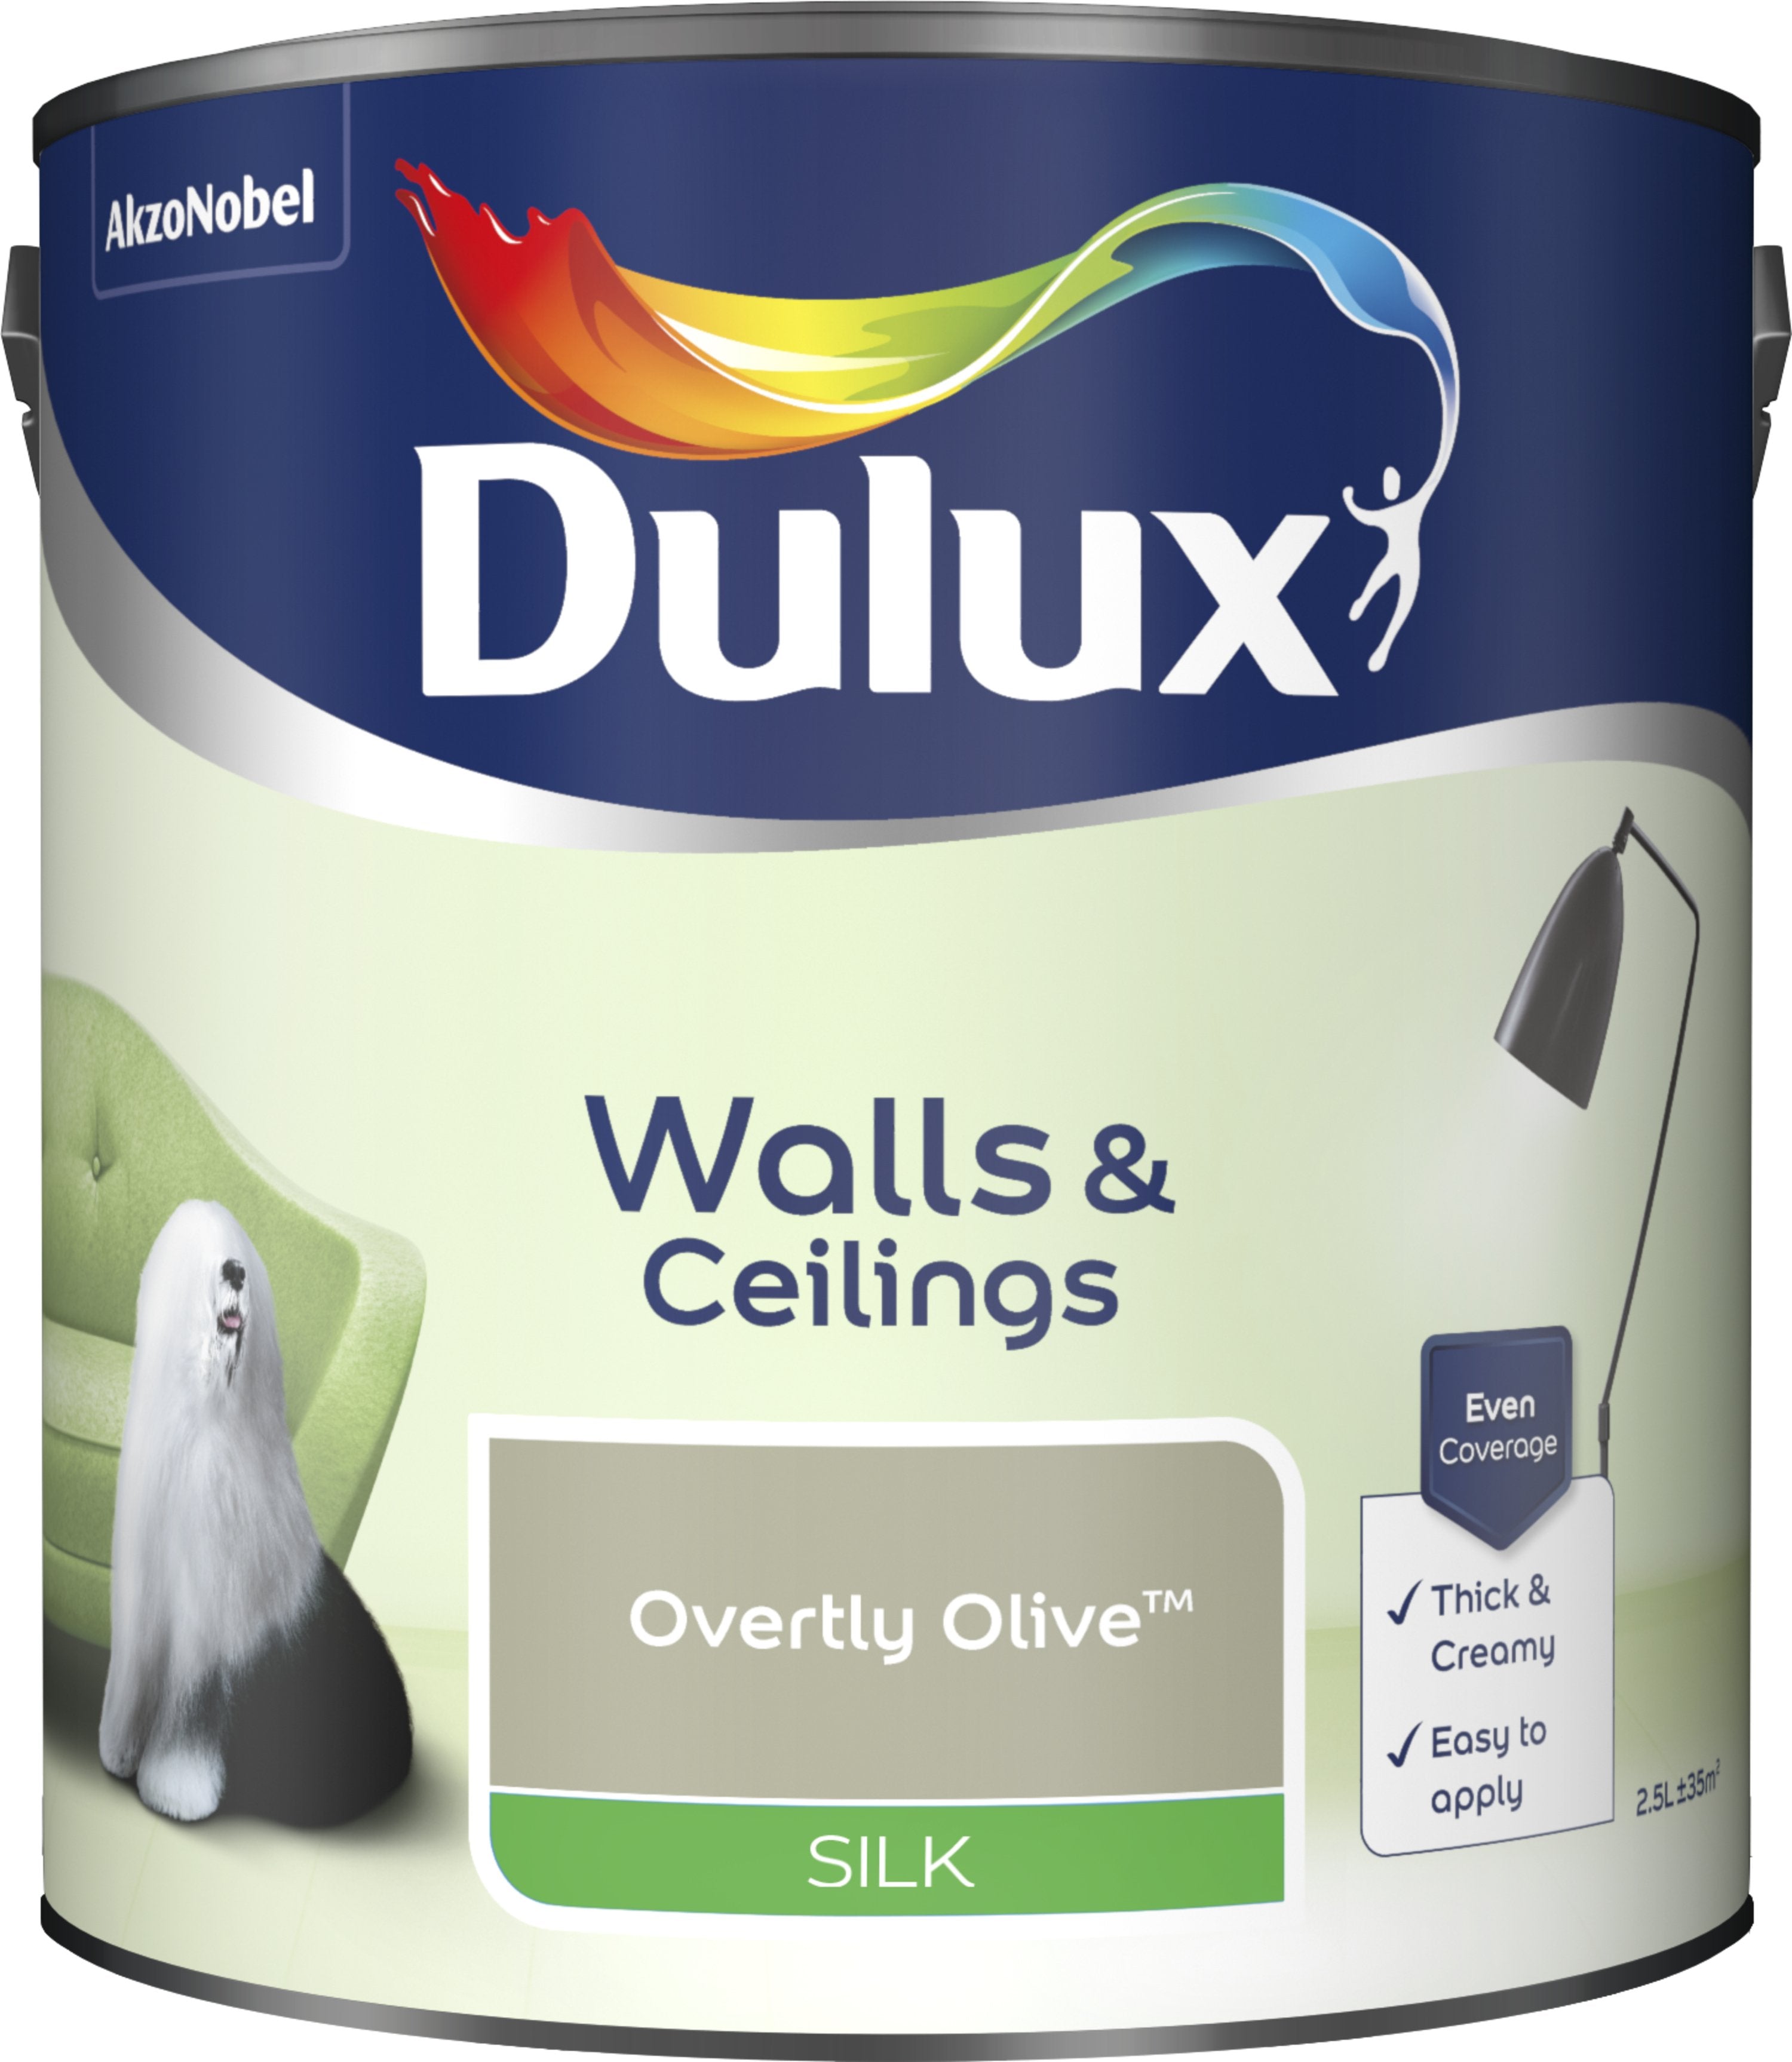 Dulux Silk Emulsion Paint For Walls And Ceilings - Overtly Olive 2.5L Garden & Diy  Home